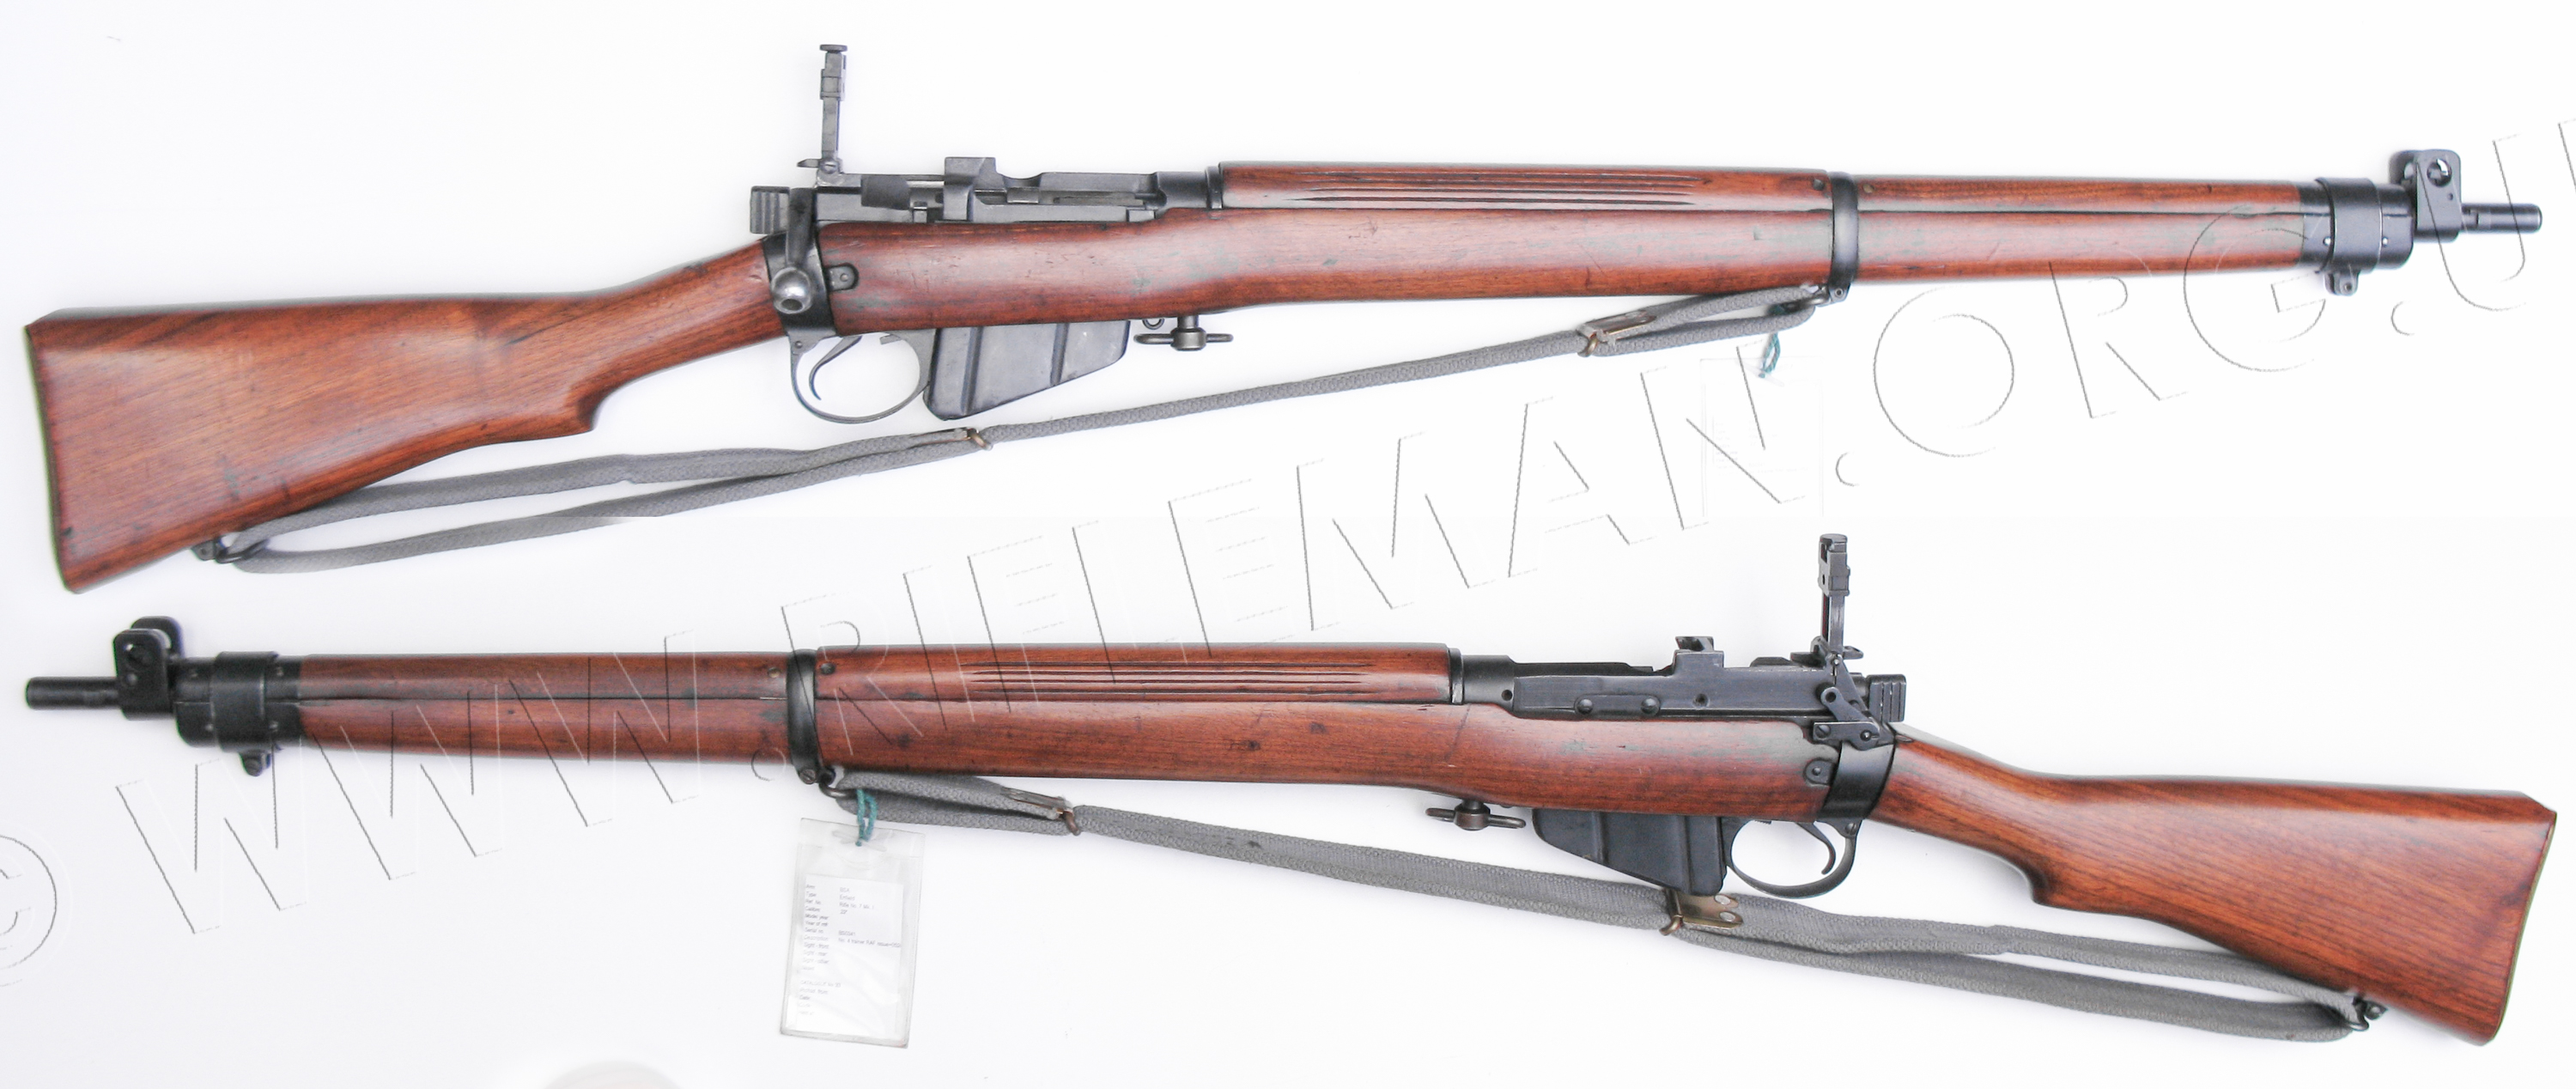 The Lee-Enfield Rifle  (British) for the Royal Air Force